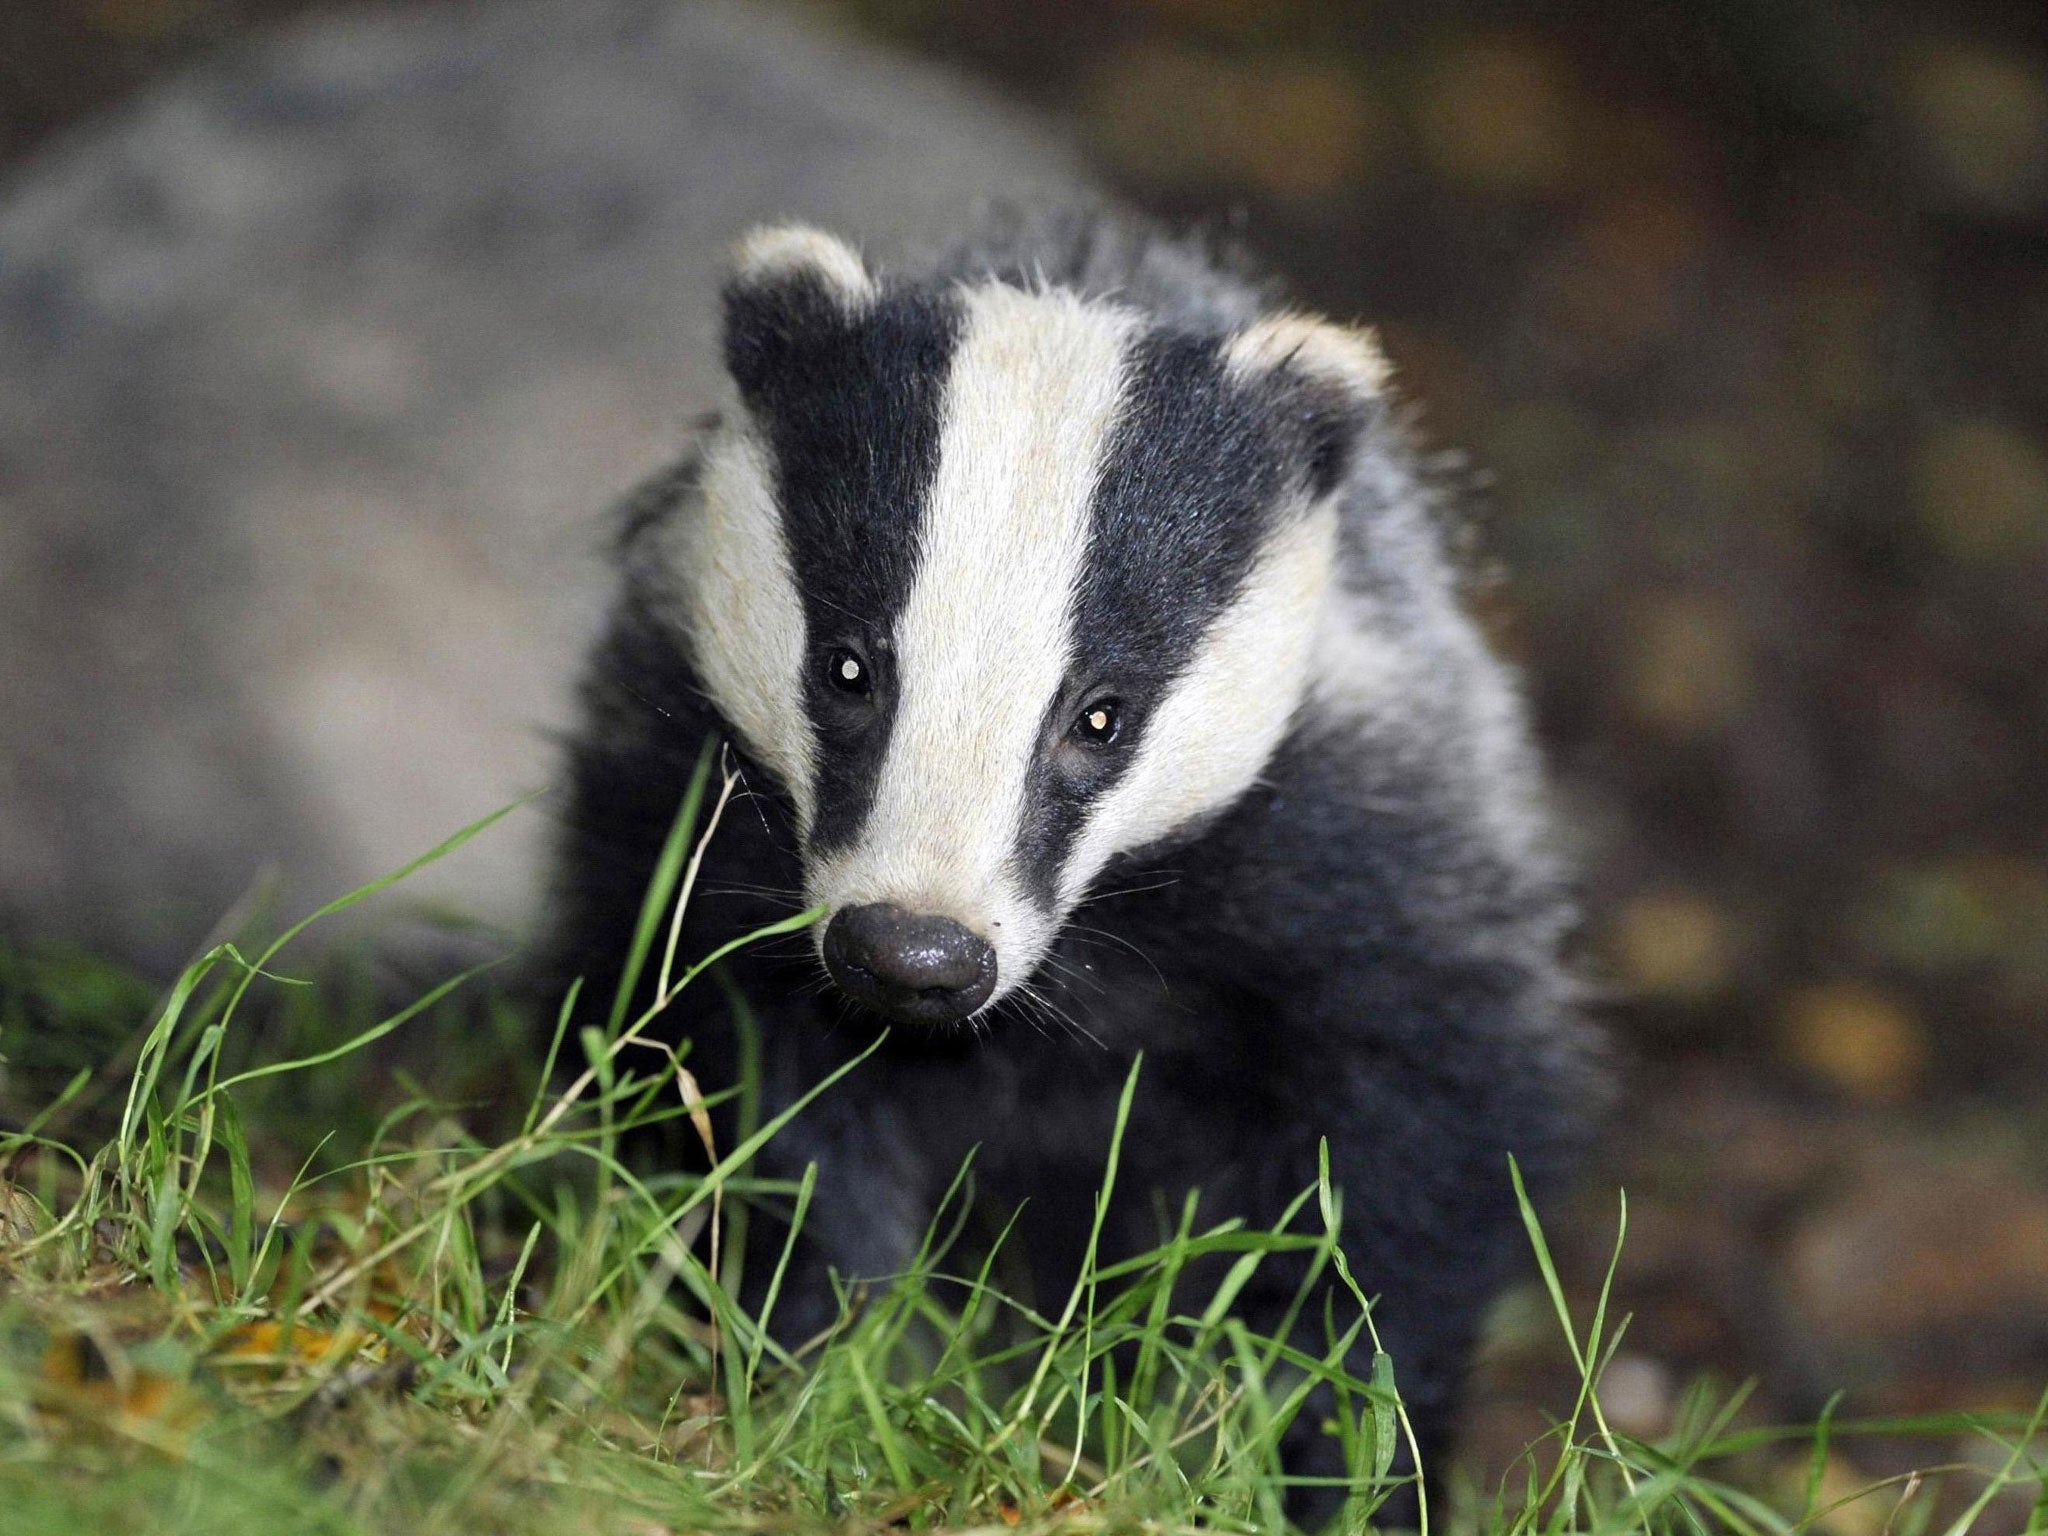 The trial needed to kill 70 per cent of the badger population to be effective